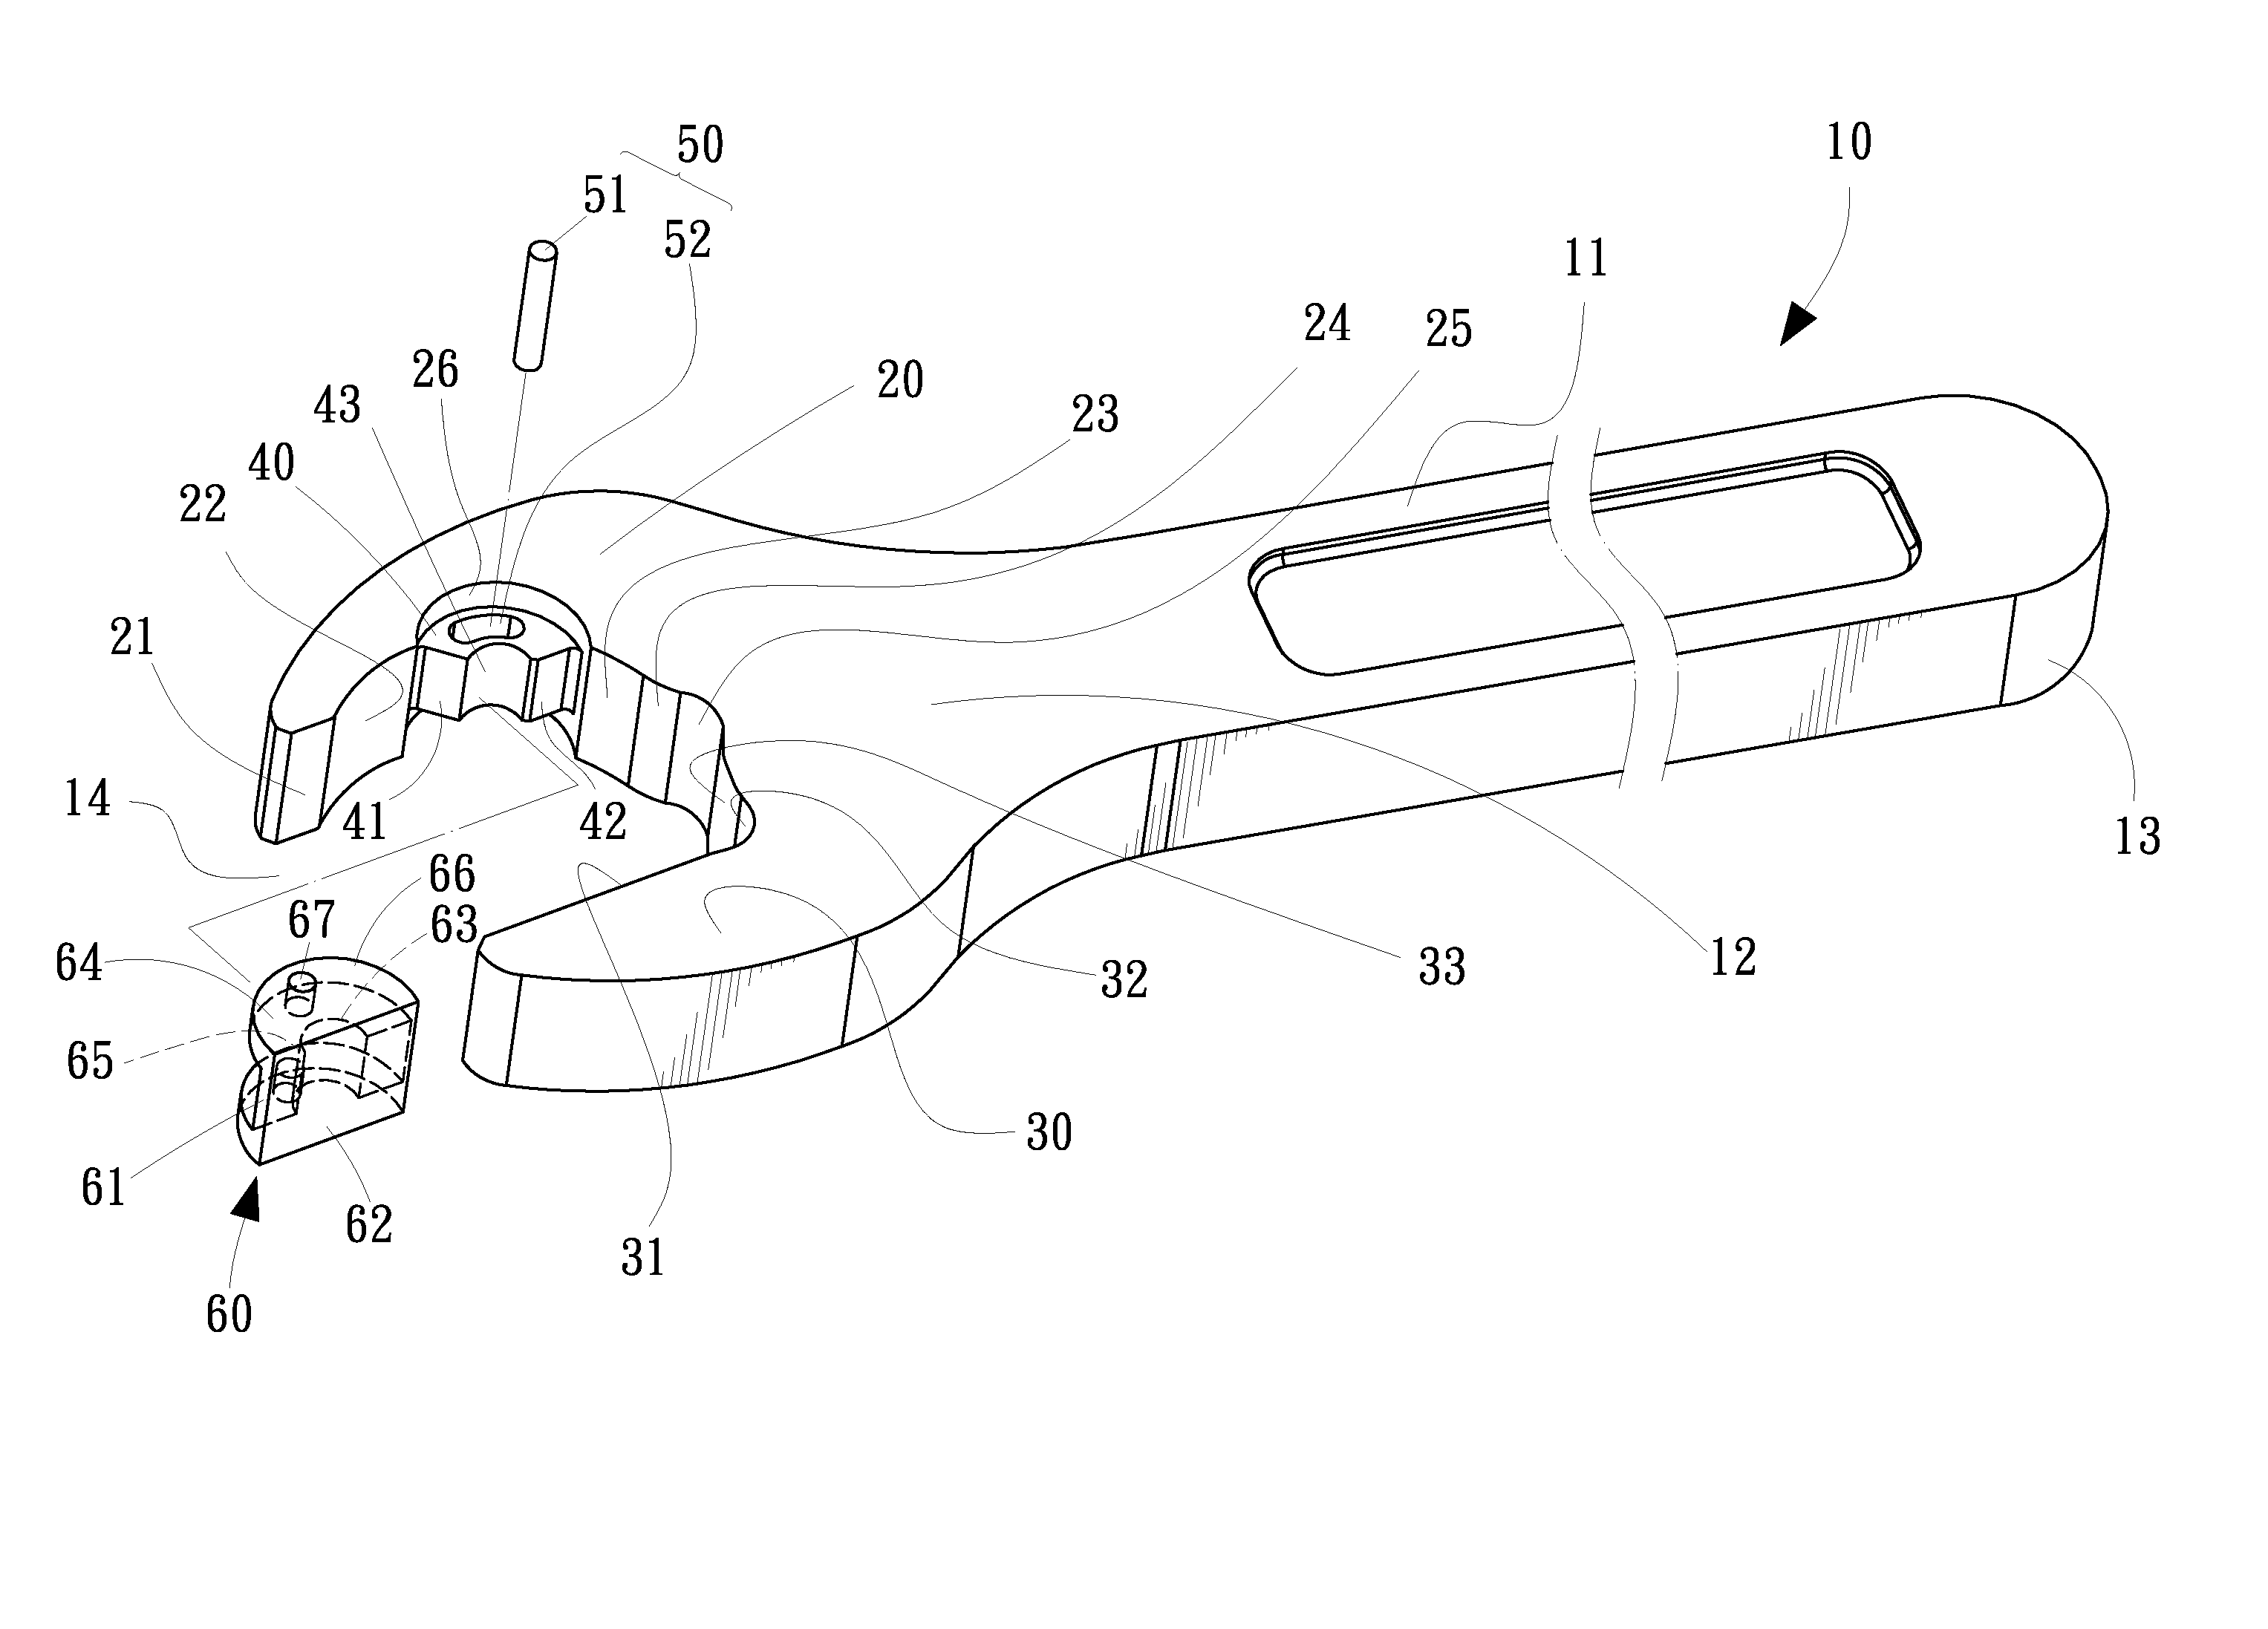 One-way open-end wrench